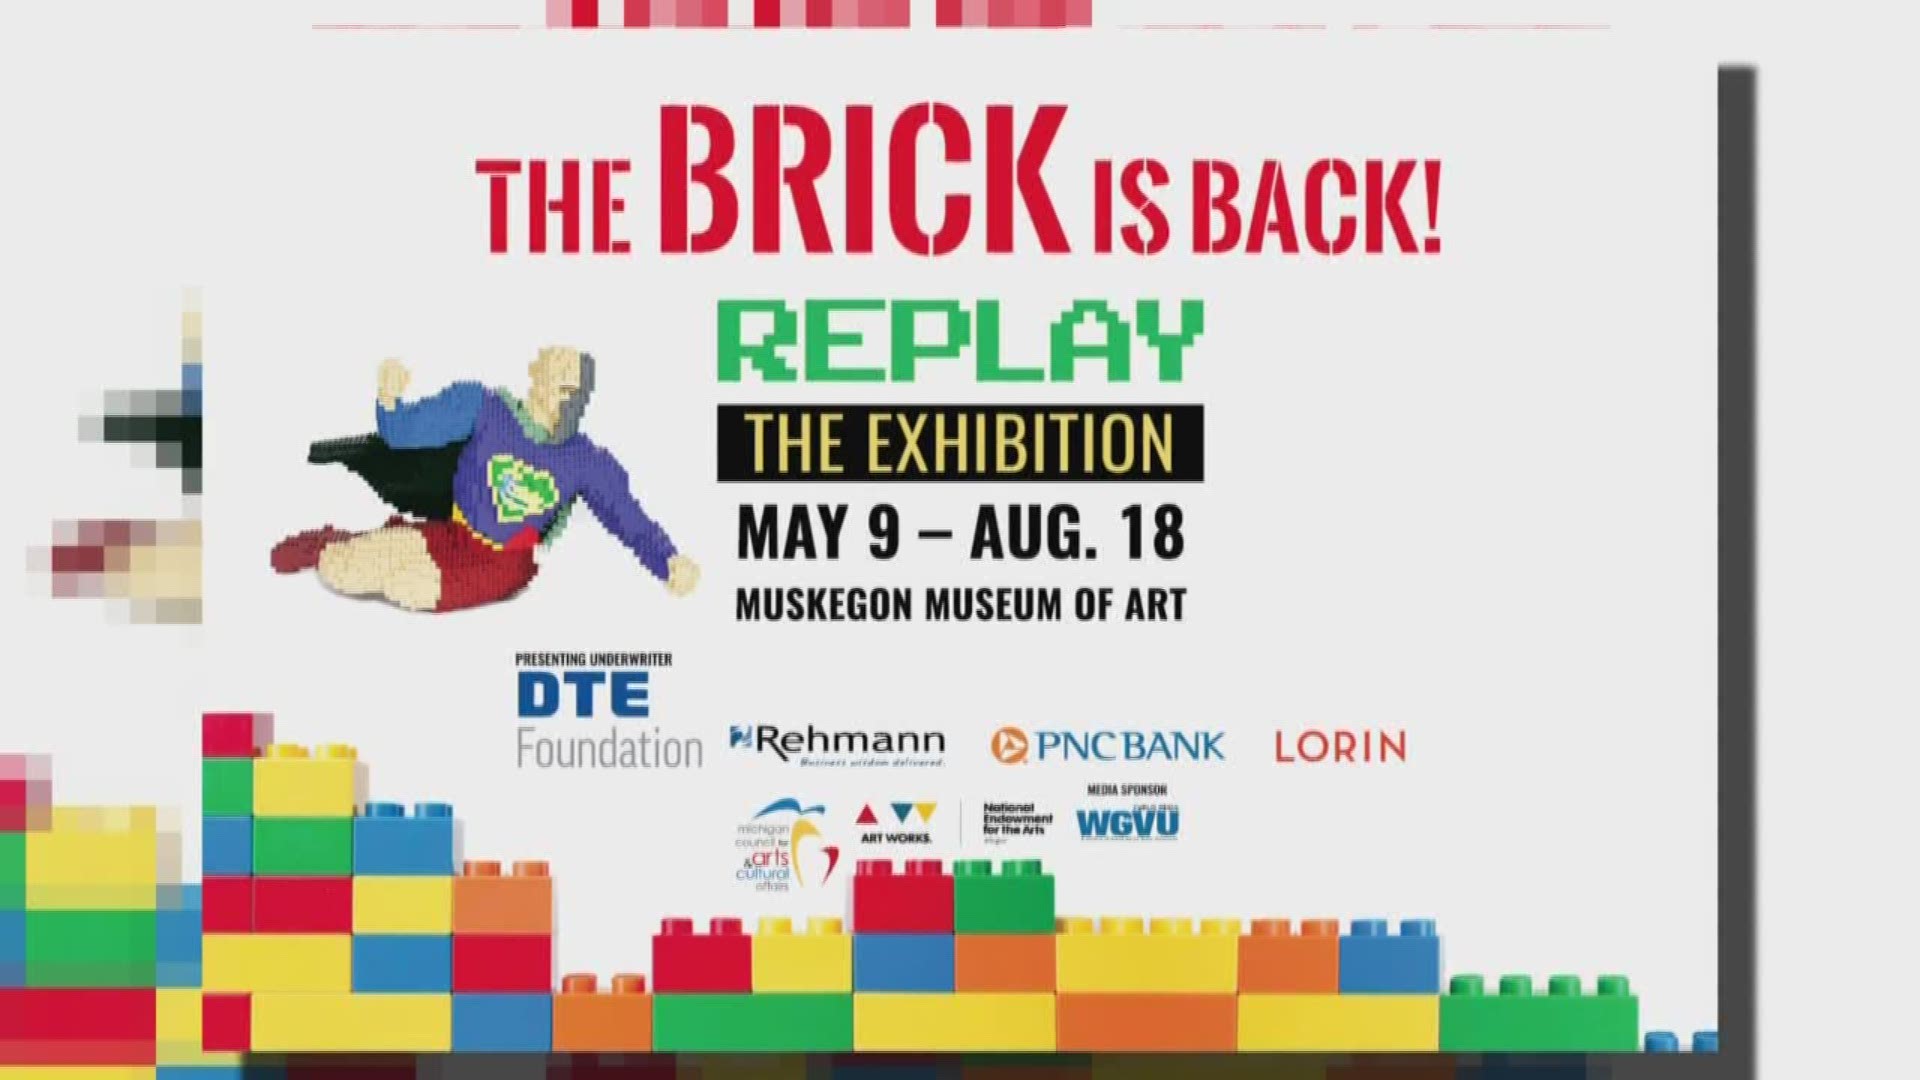 Sculptures created with LEGO bricks returns to the Muskegon Museum of Art in "Replay: The Exhibition". The exhibit features a variety of art from the Millenium Falcon, Pikachu, Donald Duck and more.